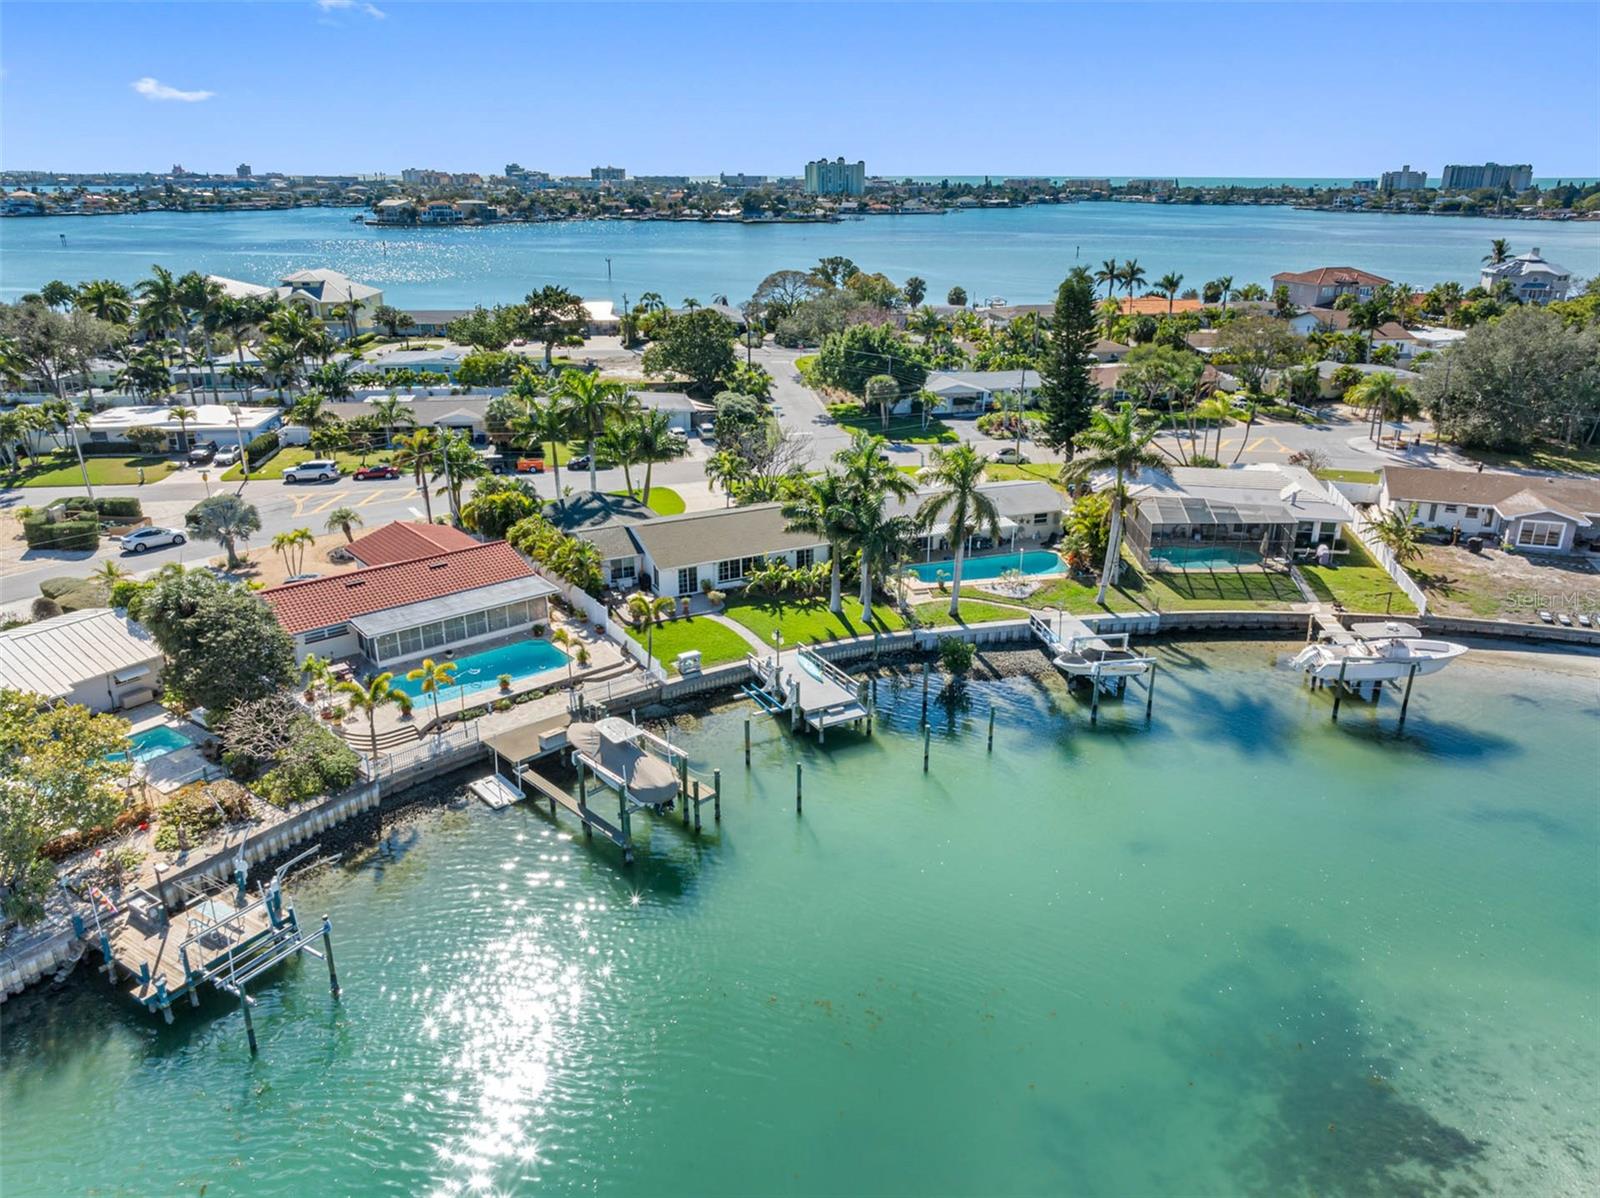 Situated on the protected Gulf's intracoastal waterway, this single-story residence is ideal for water enthusiasts.